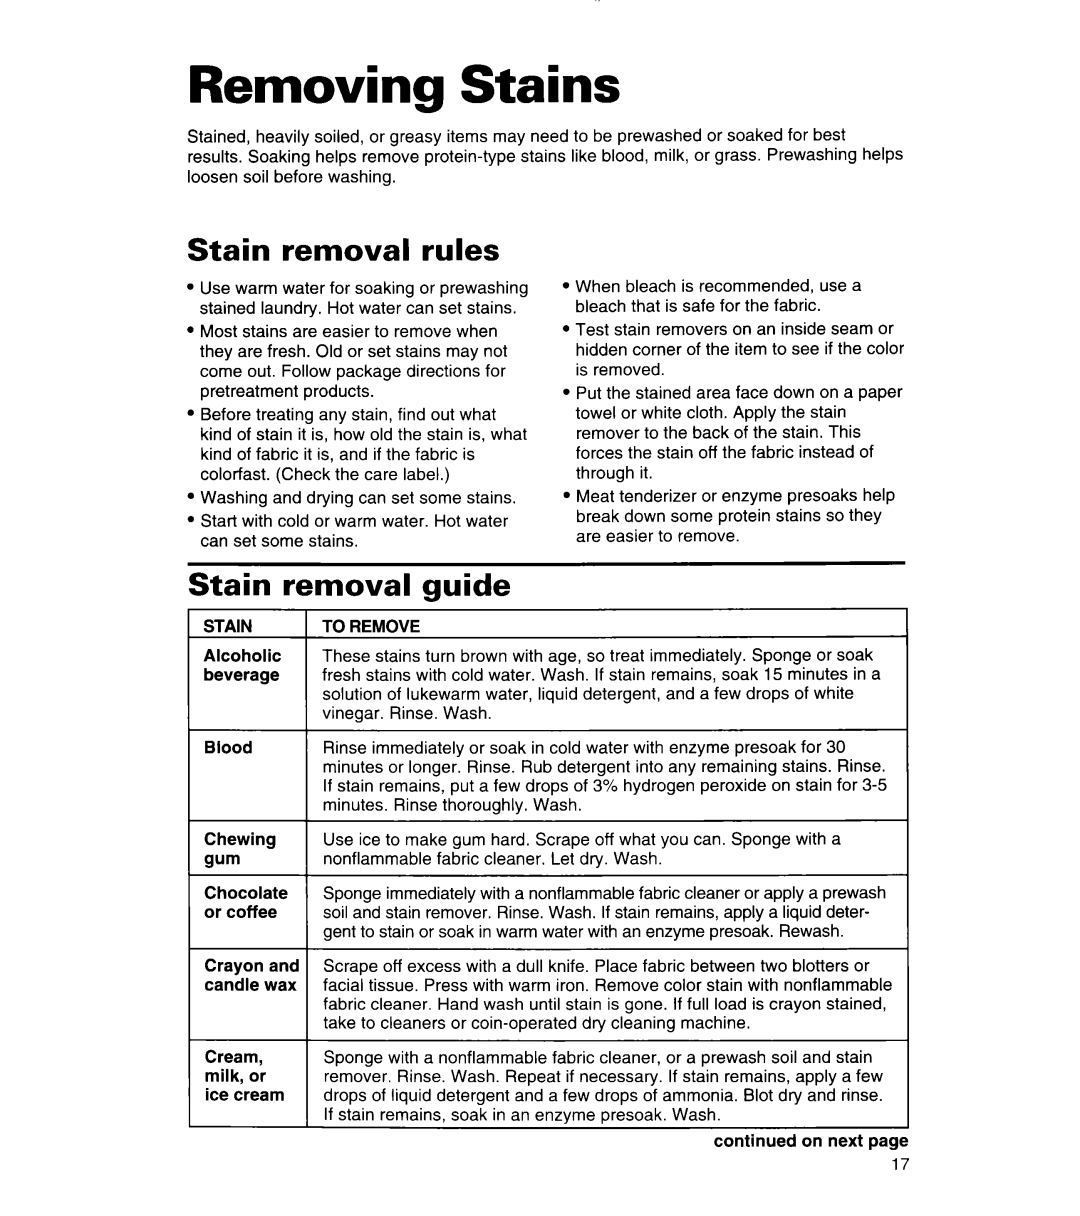 Whirlpool 3360464 warranty Removing Stains, Stain removal rules, guide 